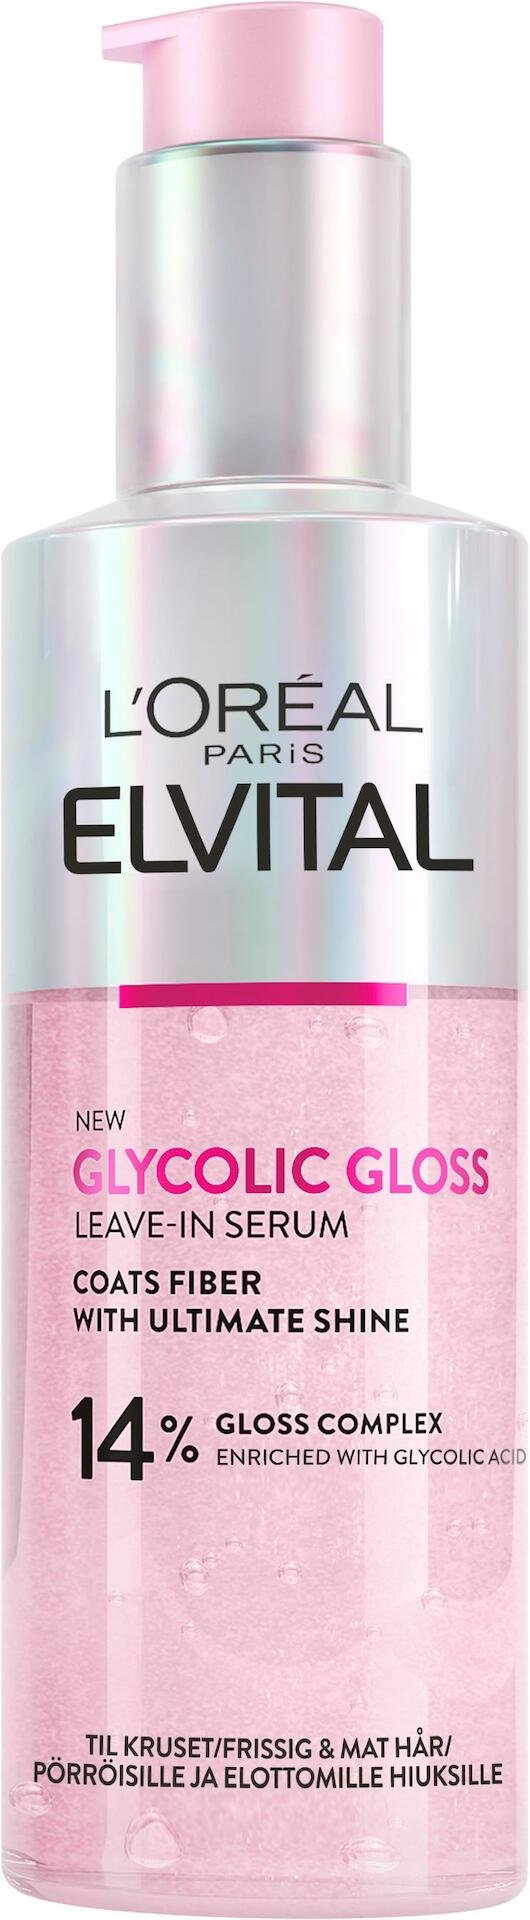 L'Oréal Paris Elvital Glycolic Gloss leave-in for normal hair 150 ml